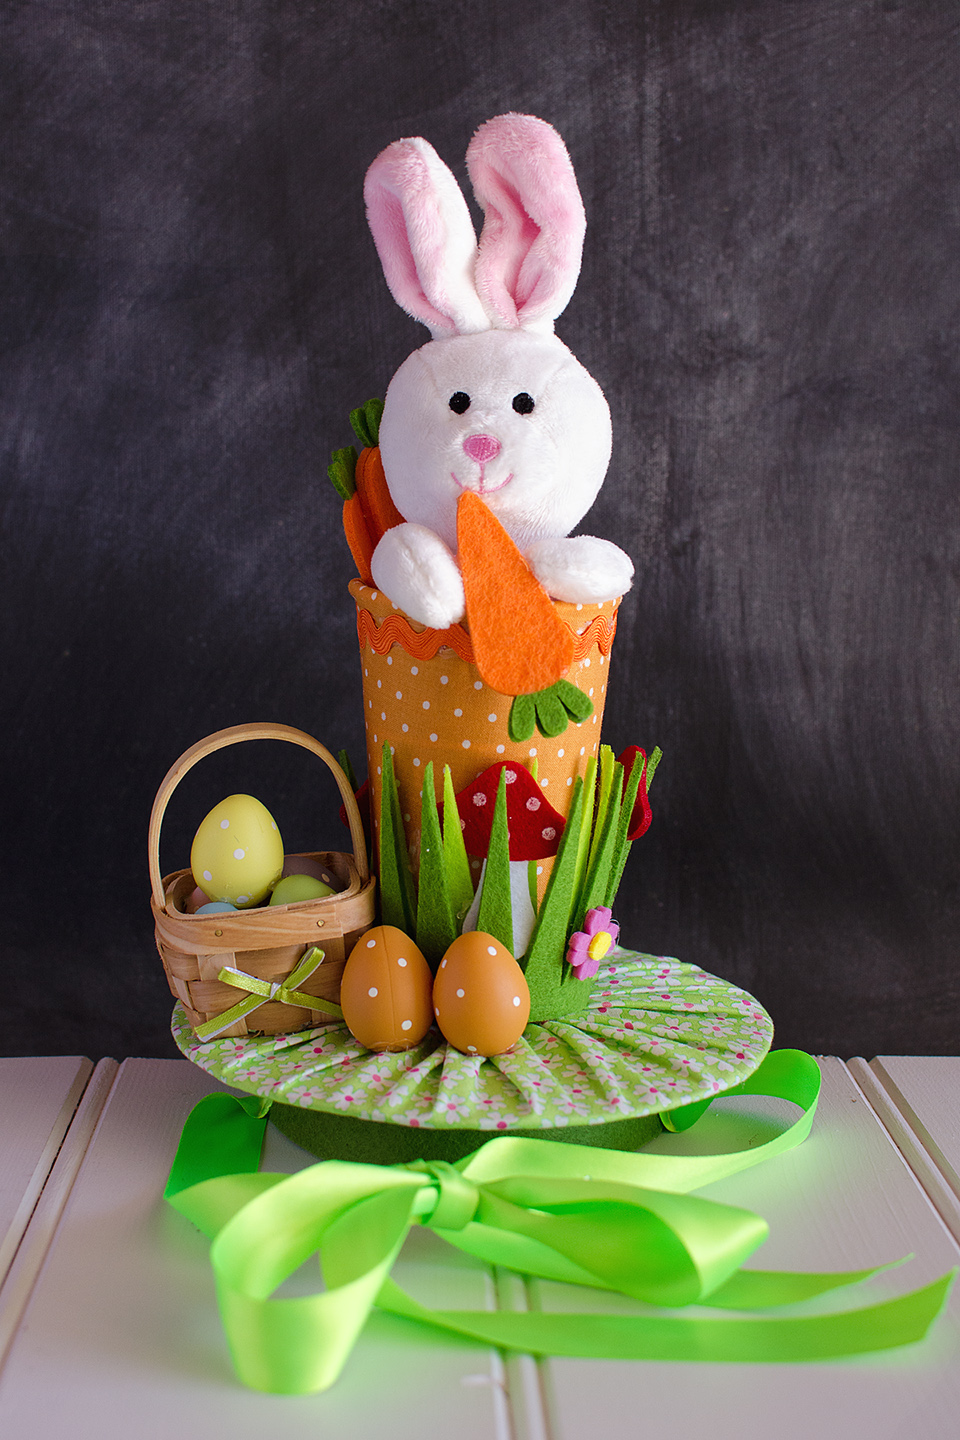 5 Fun and Creative Ideas for Your Easter Hat Parade